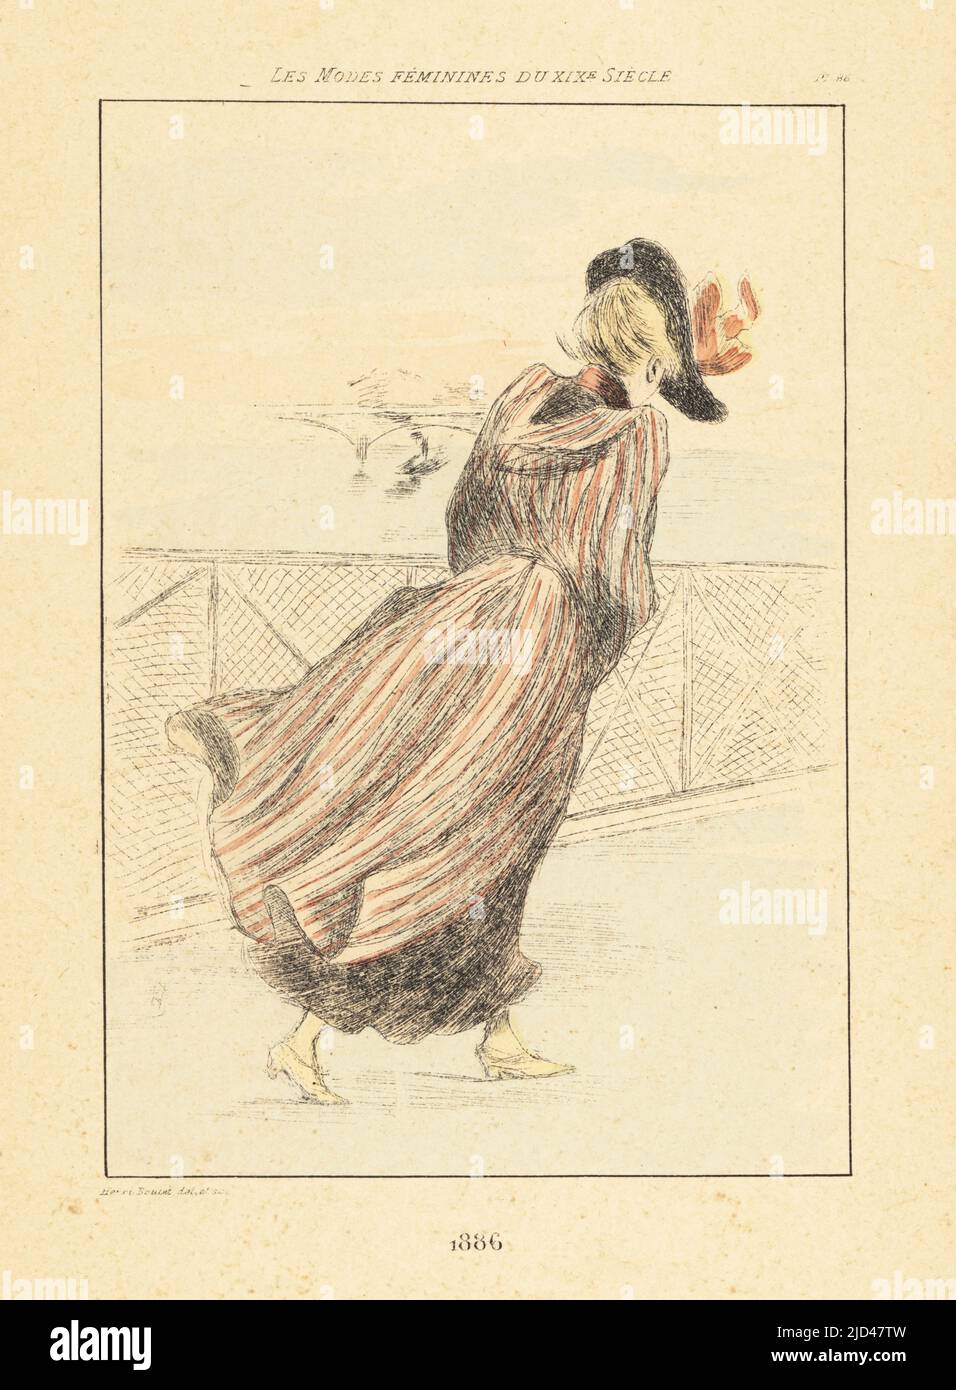 Fashionable woman walking on a windy day across Pont des Arts, Paris, 1886. Handcoloured drypoint or pointe-seche etching by Henri Boutet from Les Modes Feminines du XIXeme Siecle (Female Fashions of the 19th Century), Ernest Flammarion, Paris, 1902. Boutet (1851-1919) was a French artist, engraver, lithographer and designer. Stock Photo